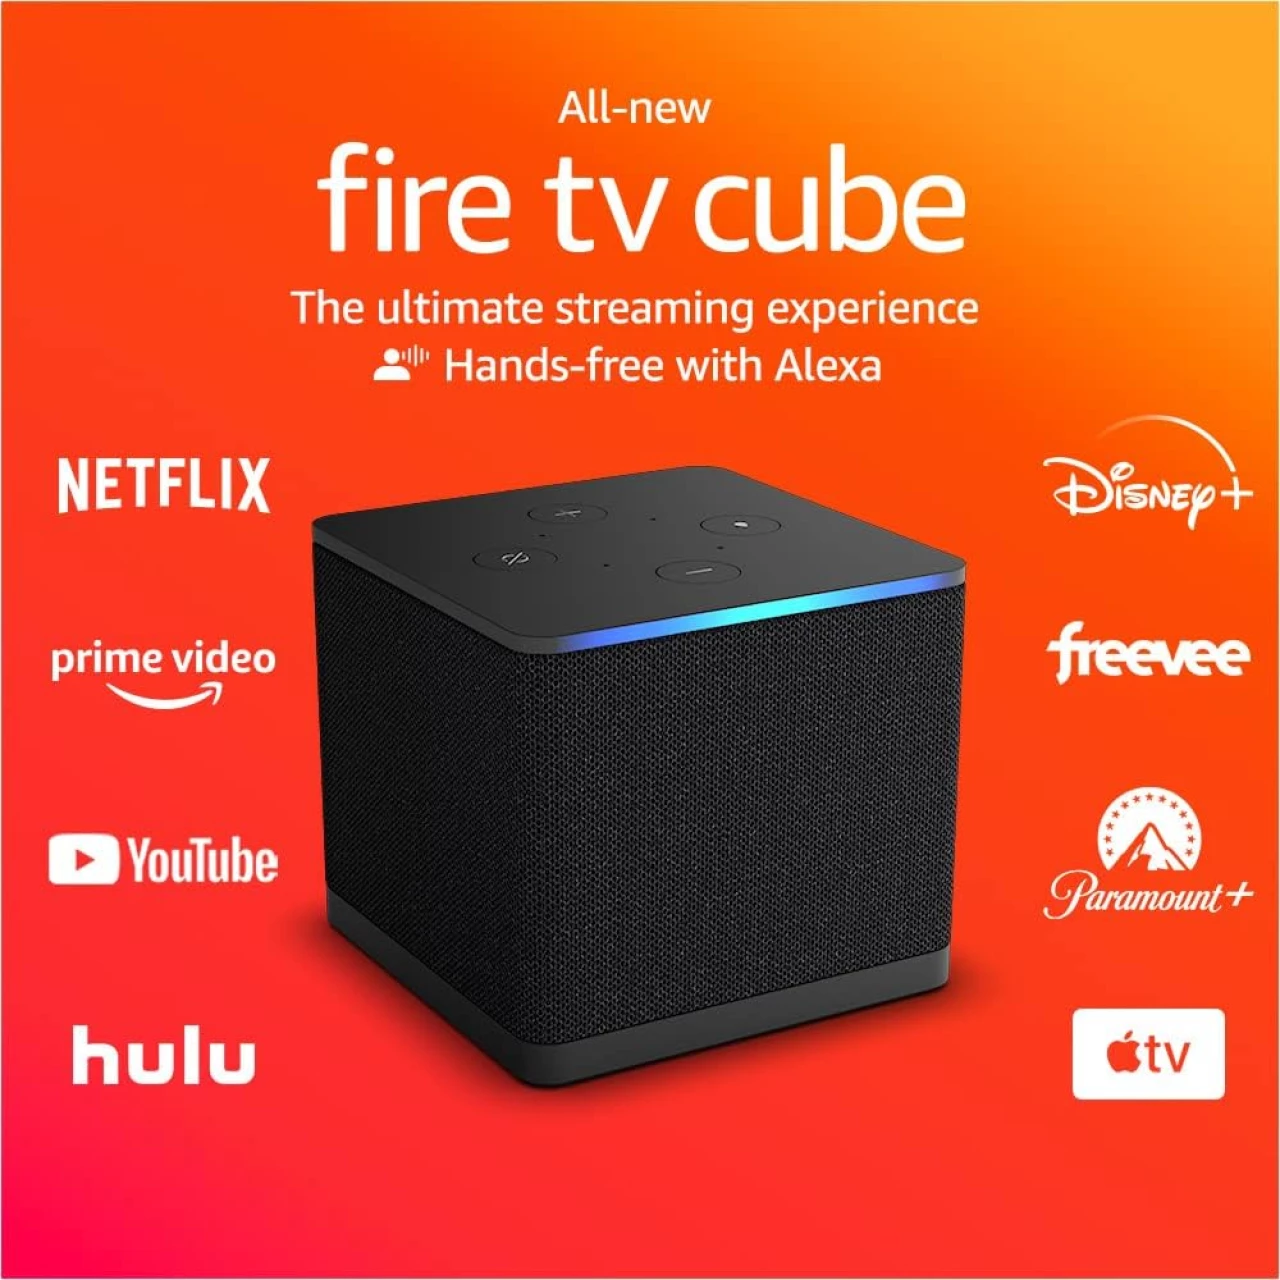 Fire TV Cube, Hands-free streaming device with Alexa, Wi-Fi 6E, 4K Ultra HD